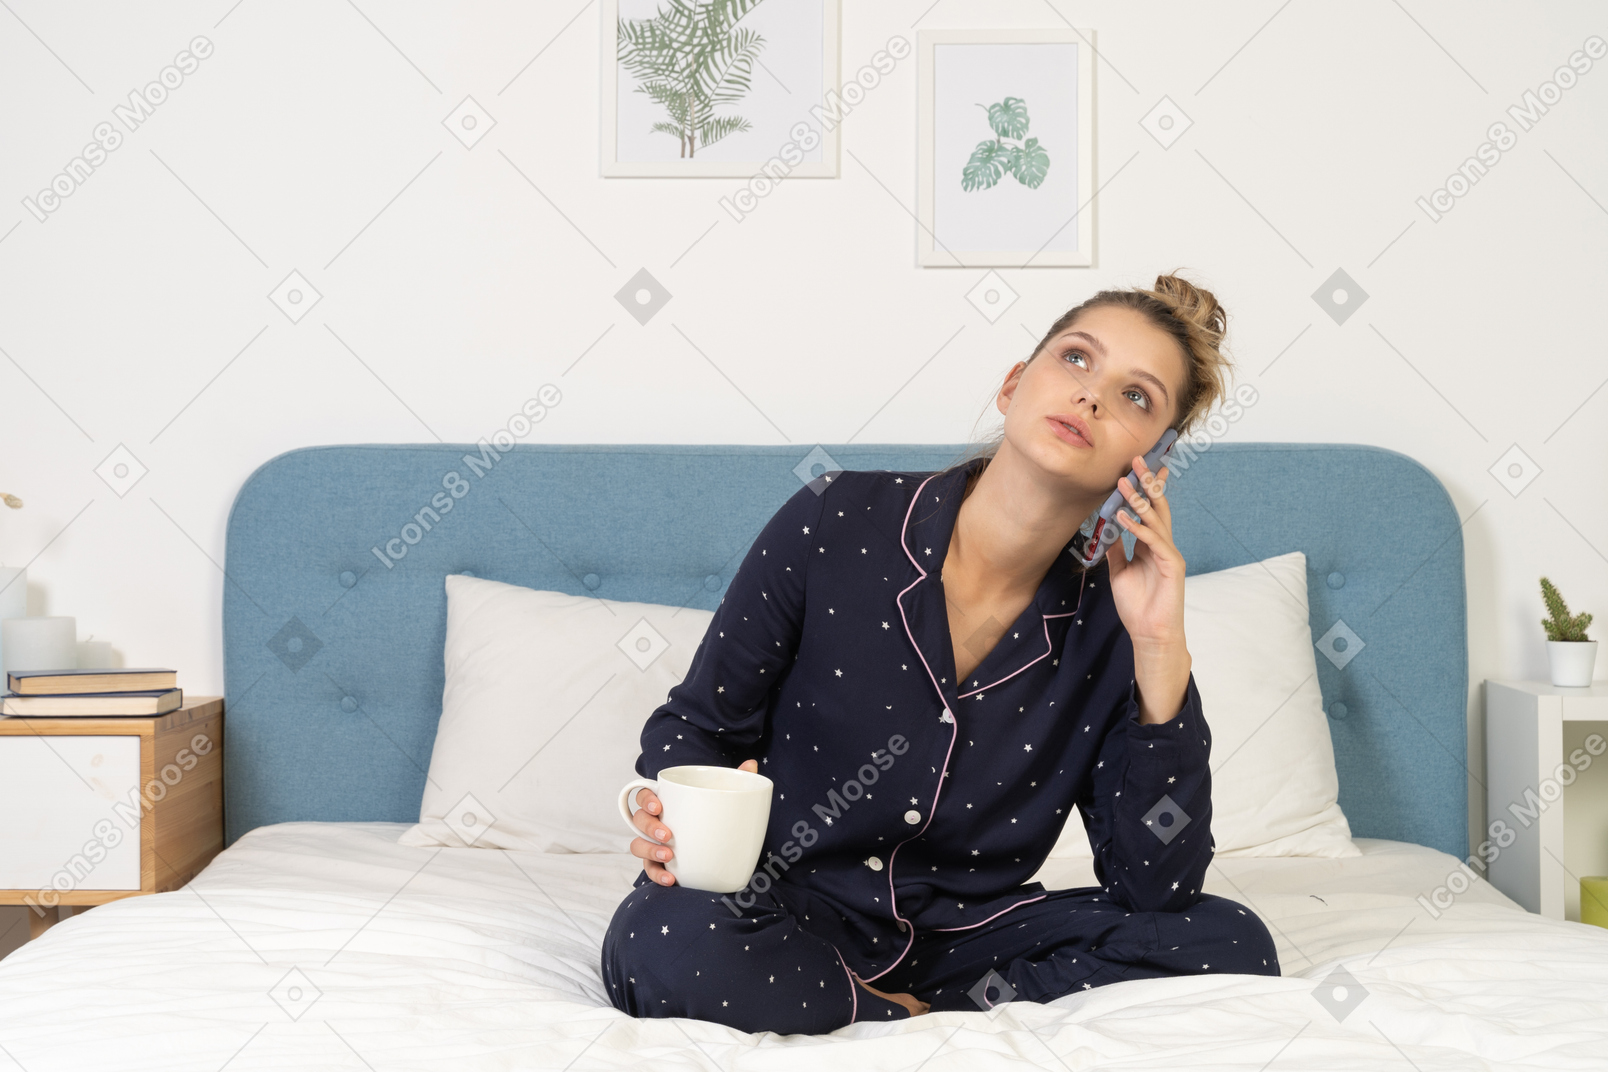 Front of a young female in pajama sitting in bed holding the cup and having a phone call